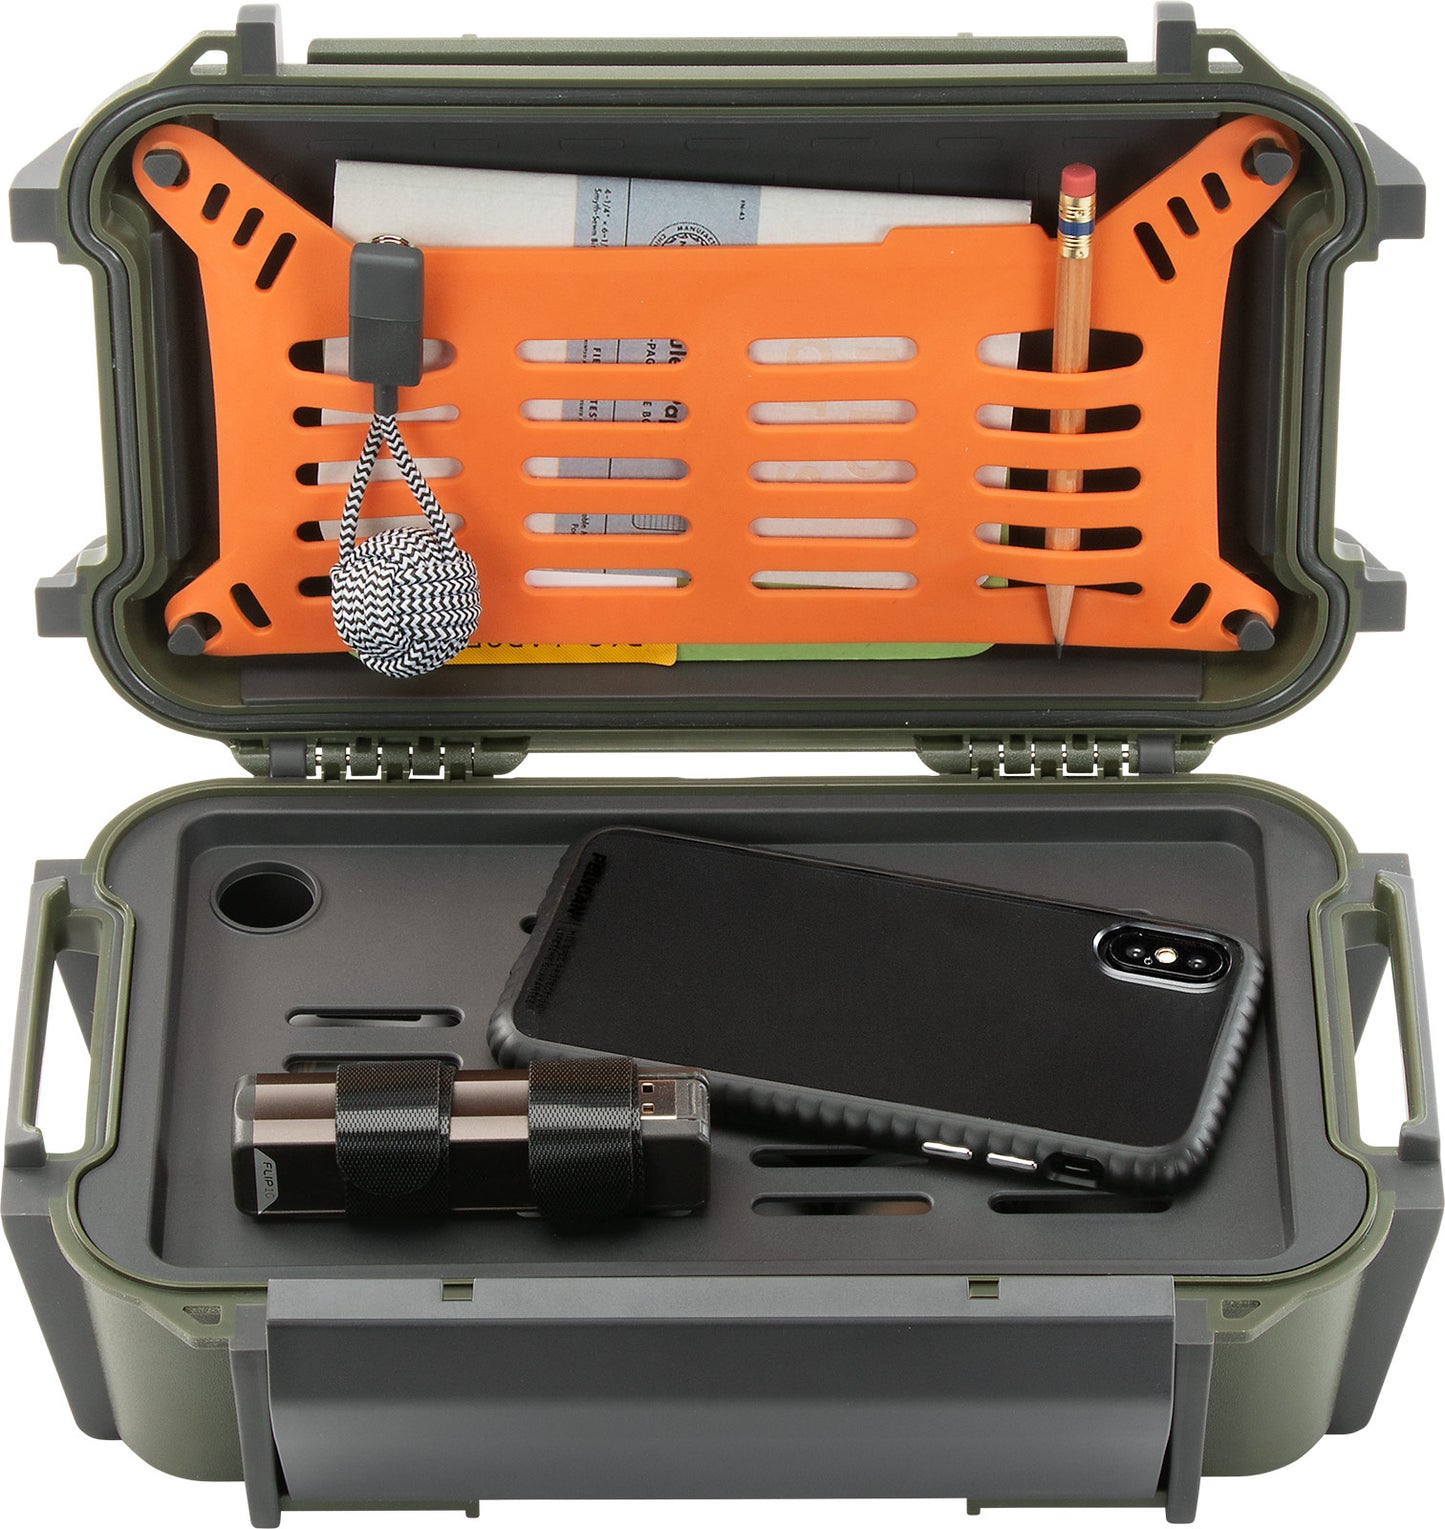 Pelican R60 Personal Utility Ruck Case